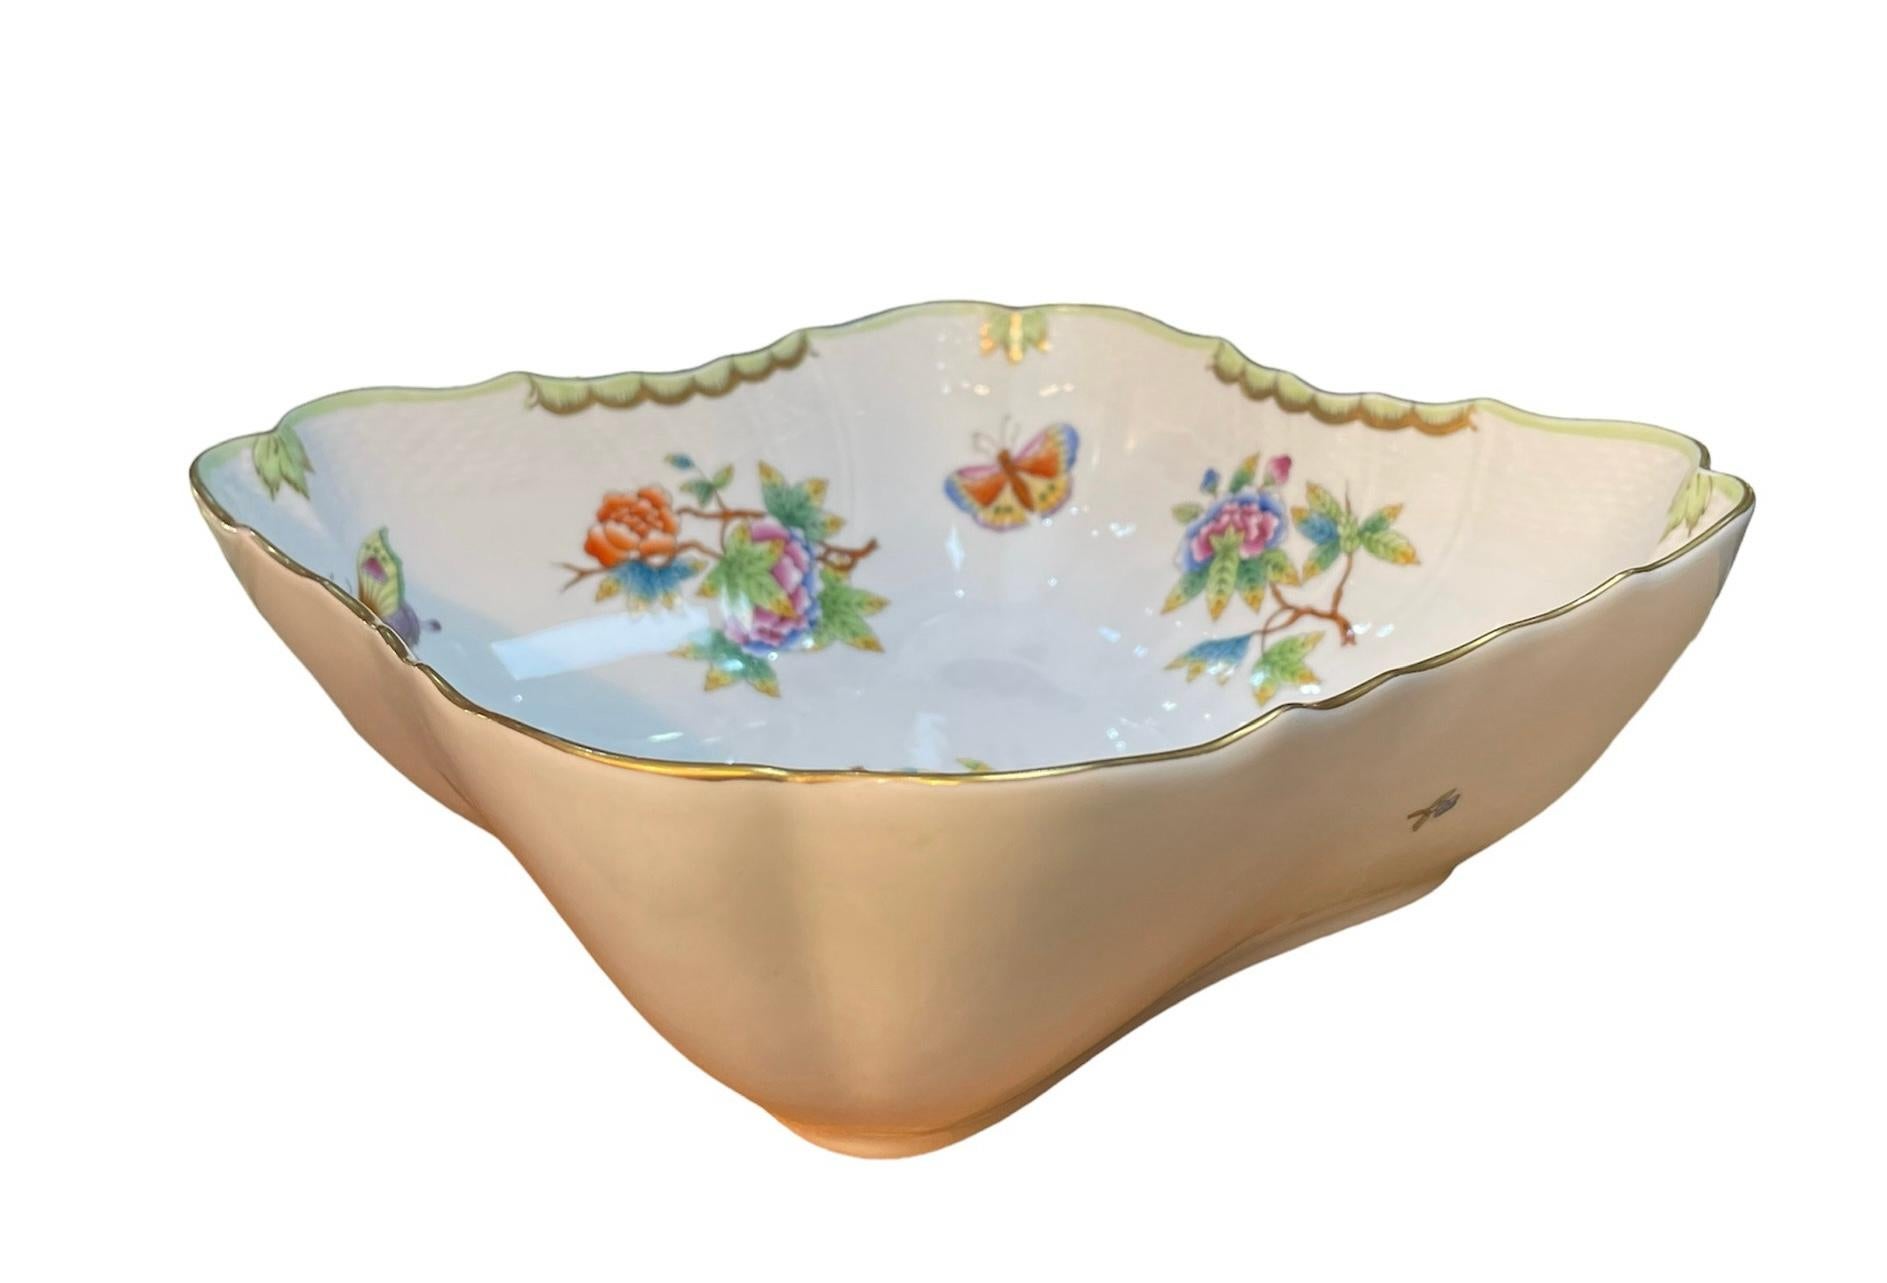 Herend Porcelain Queen Victoria Pattern Salad Bowl In Good Condition For Sale In Guaynabo, PR